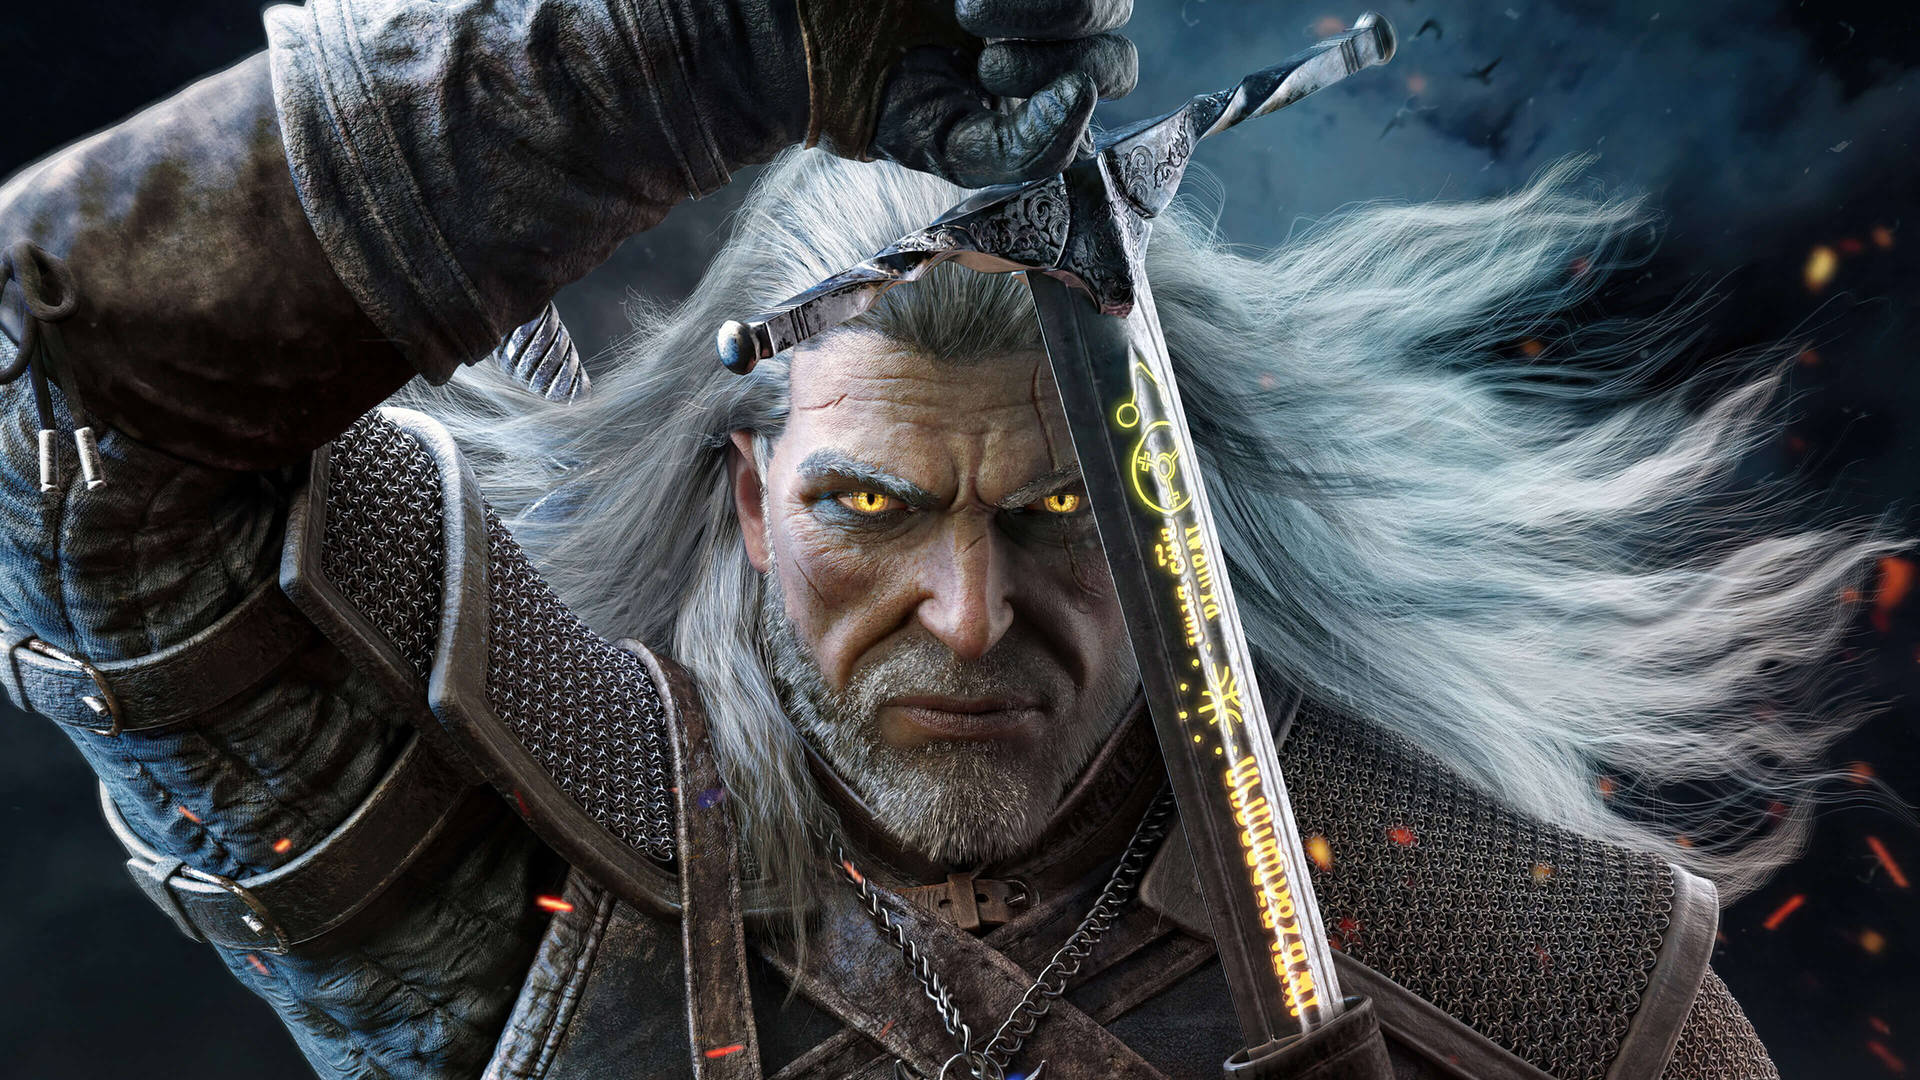 Free Witcher 3 4k Wallpaper Downloads, [100+] Witcher 3 4k Wallpapers for  FREE 